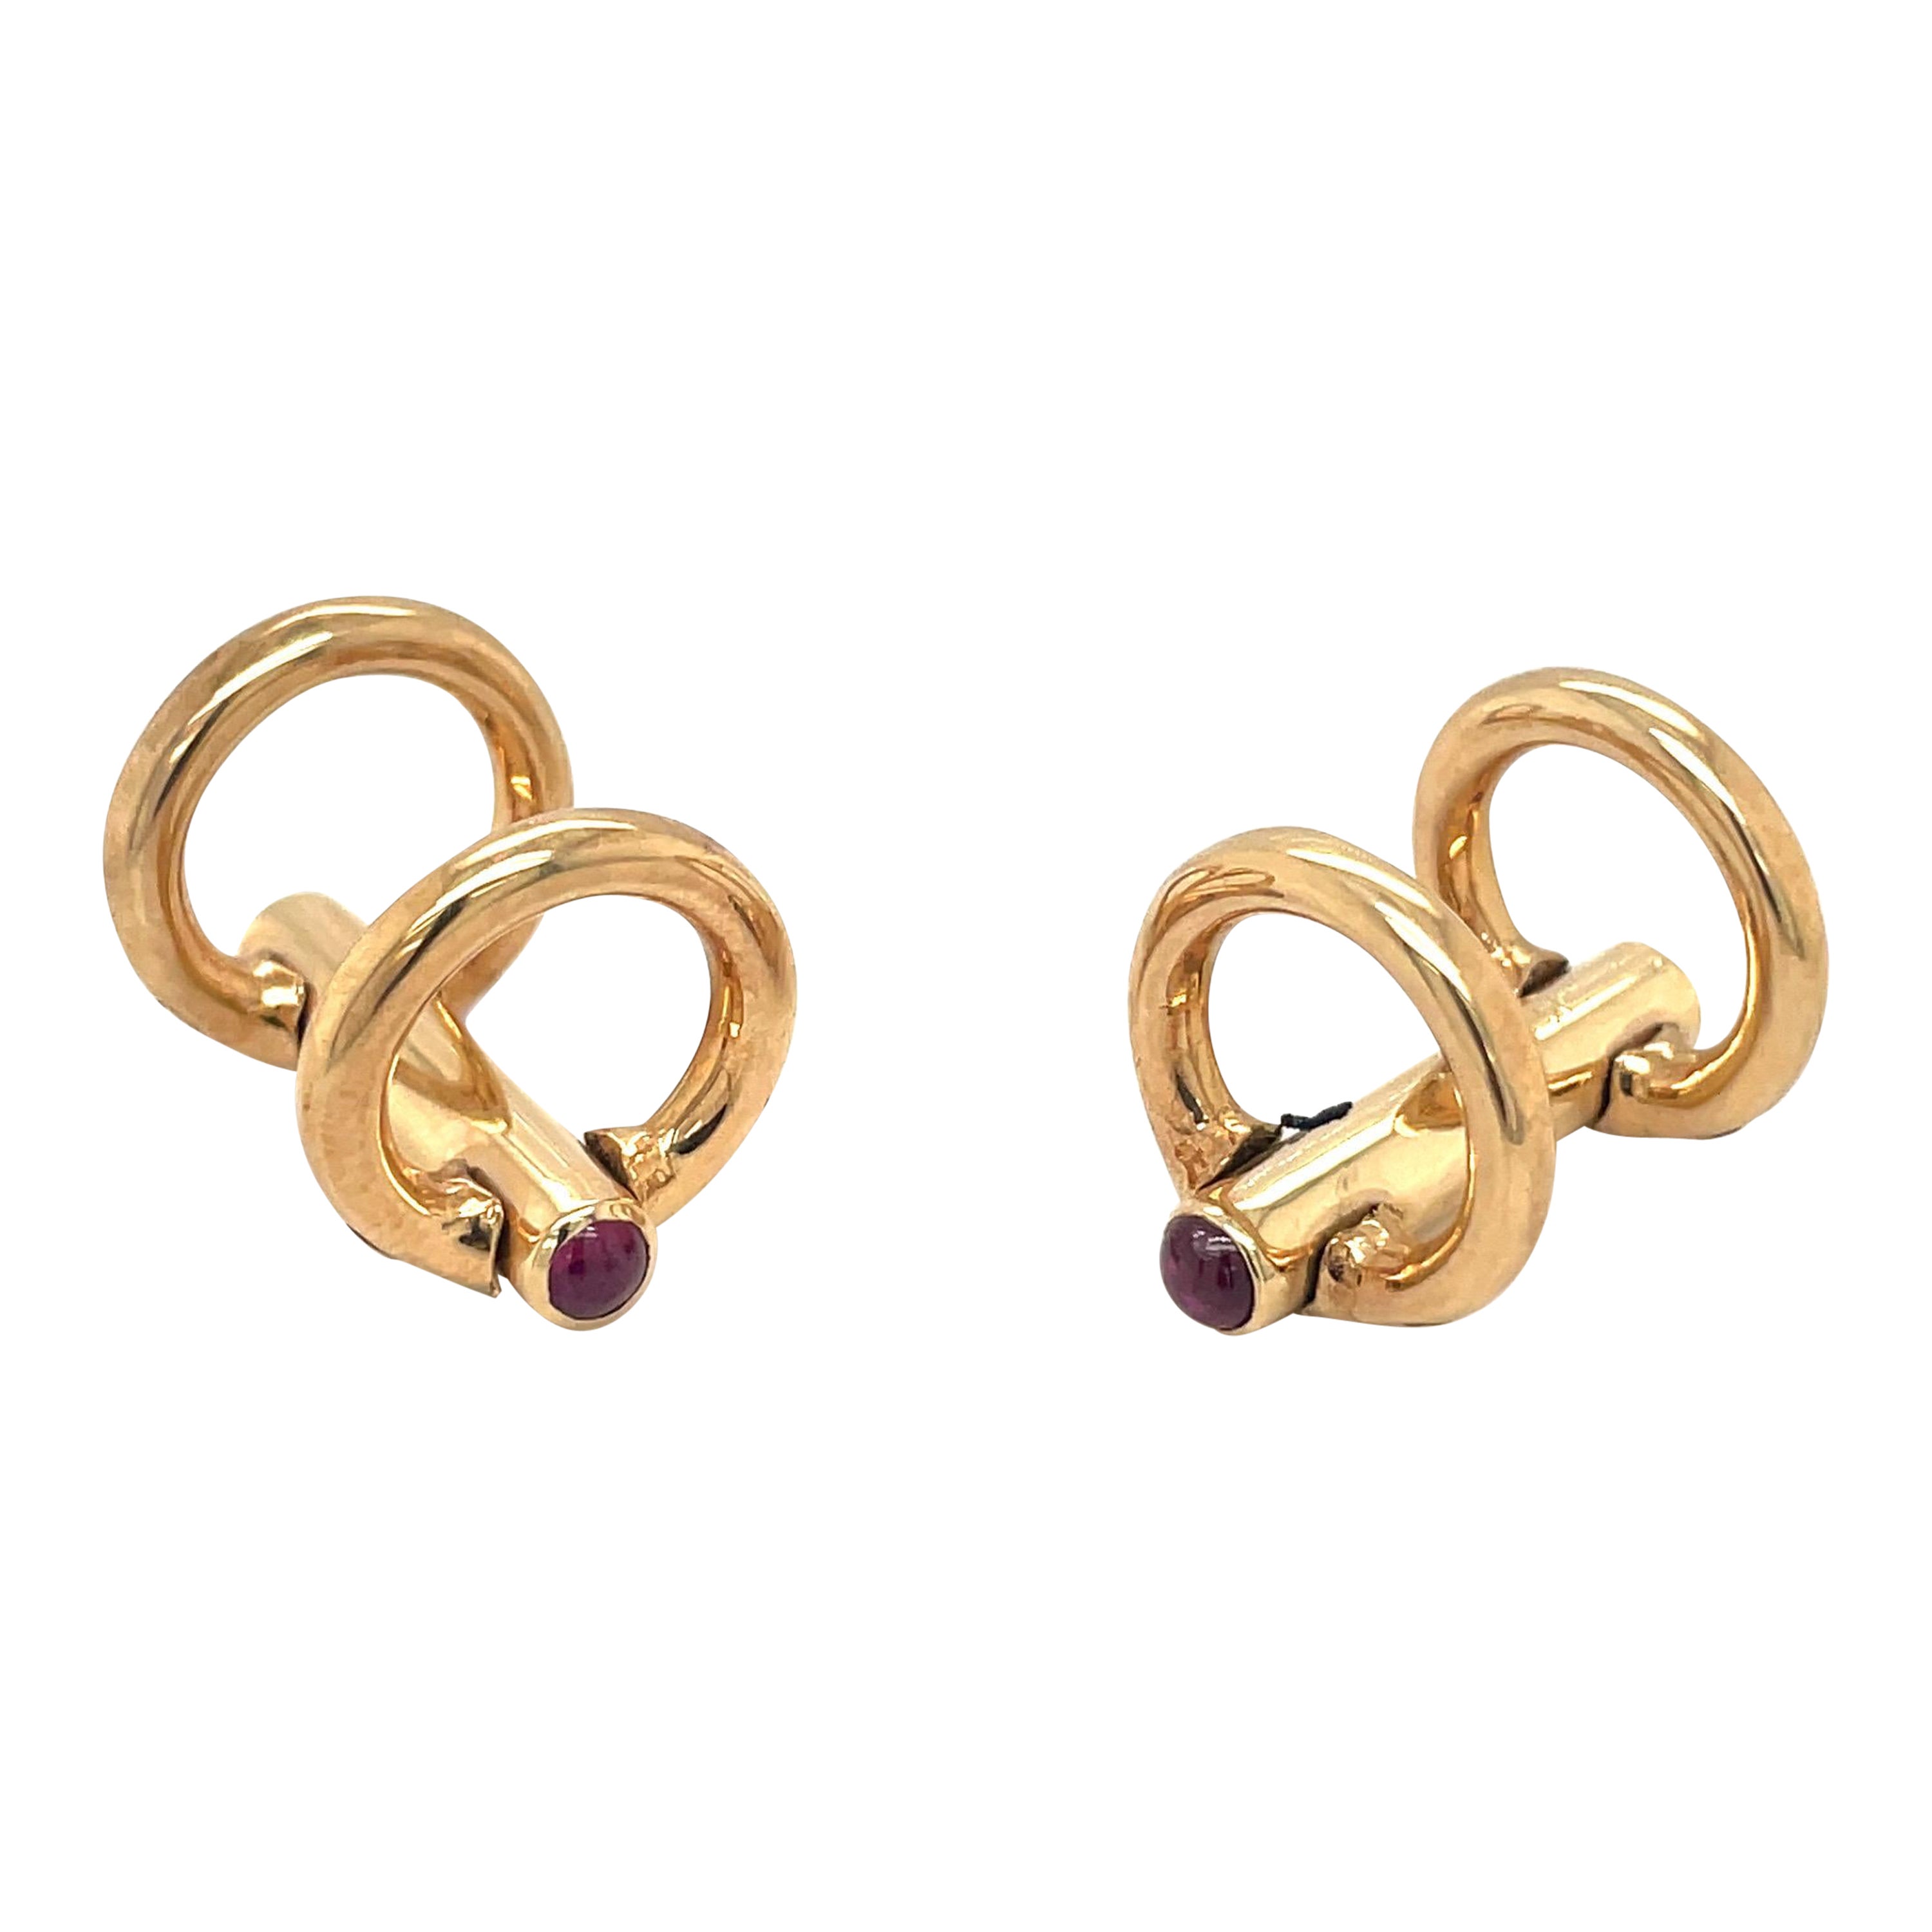 14KT Yellow Gold Cuff Links with 4 Ruby Cabochon